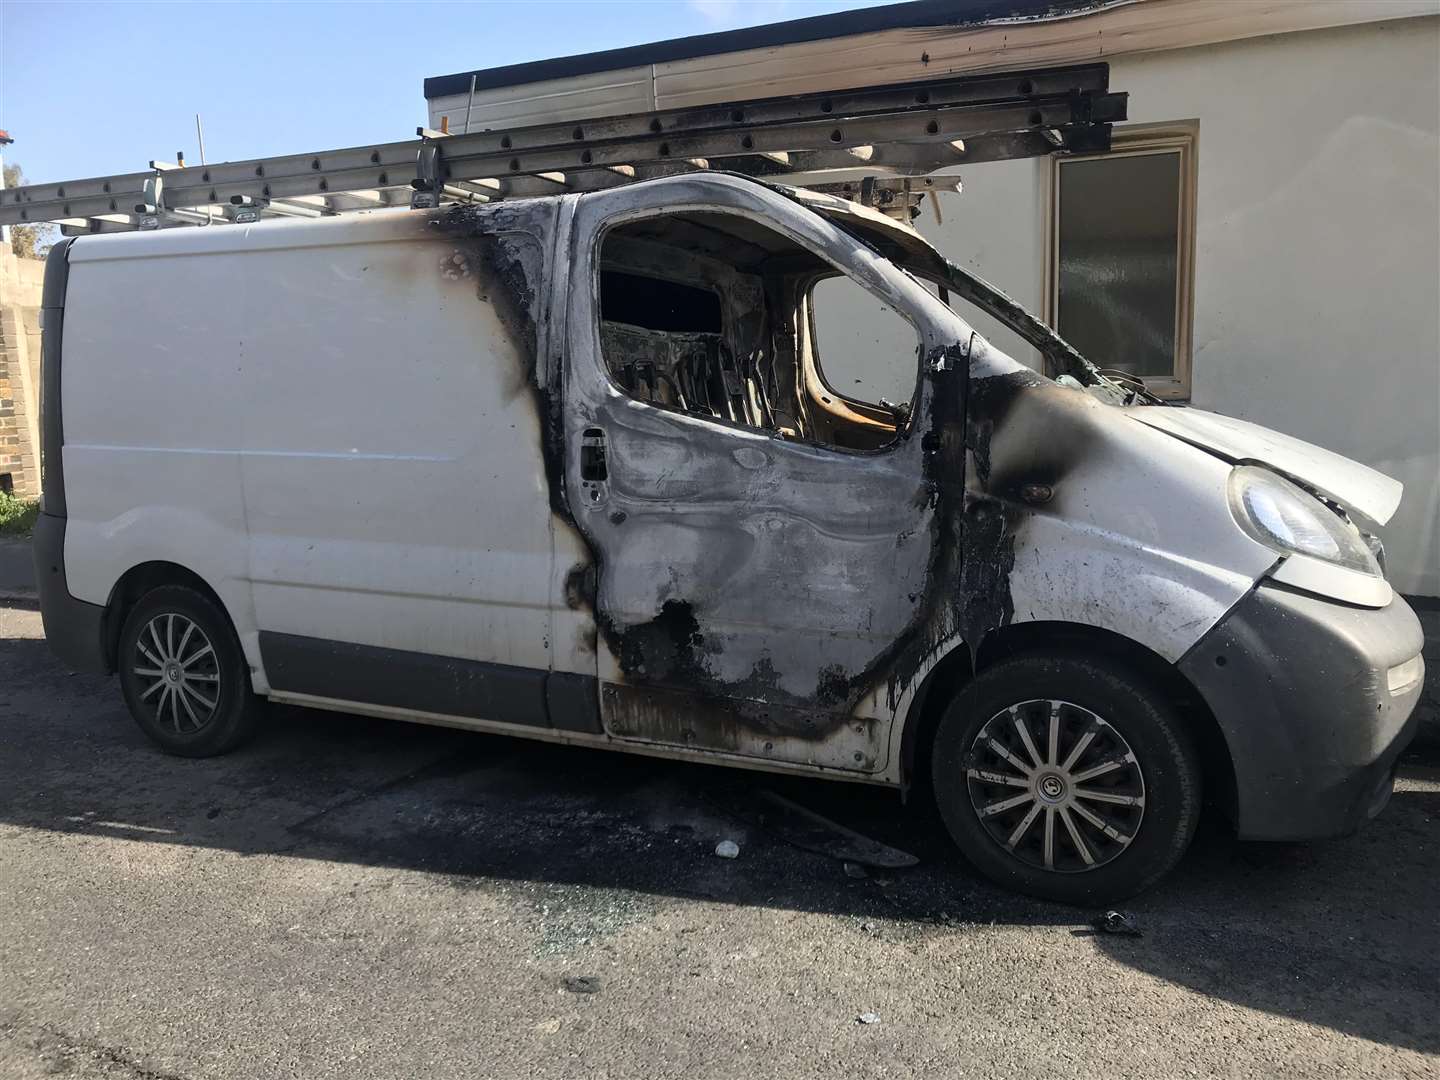 The burnt out van in Canada Road in Deal (1941693)